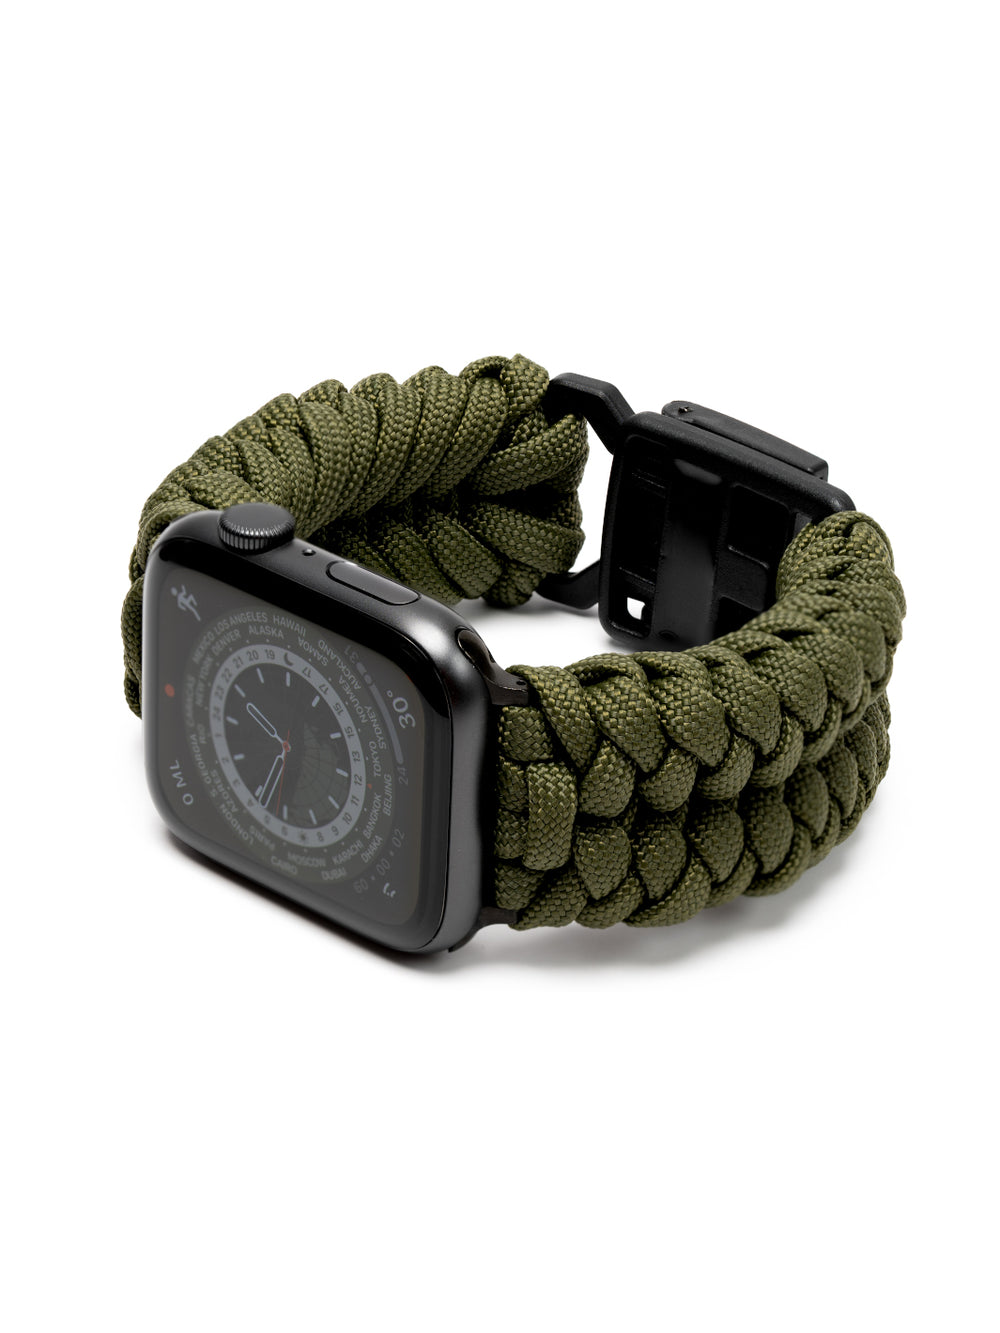 Strapcord Ribs Apple Watch Band Strap Article 003 Olive Drab 3 1065 x 1420